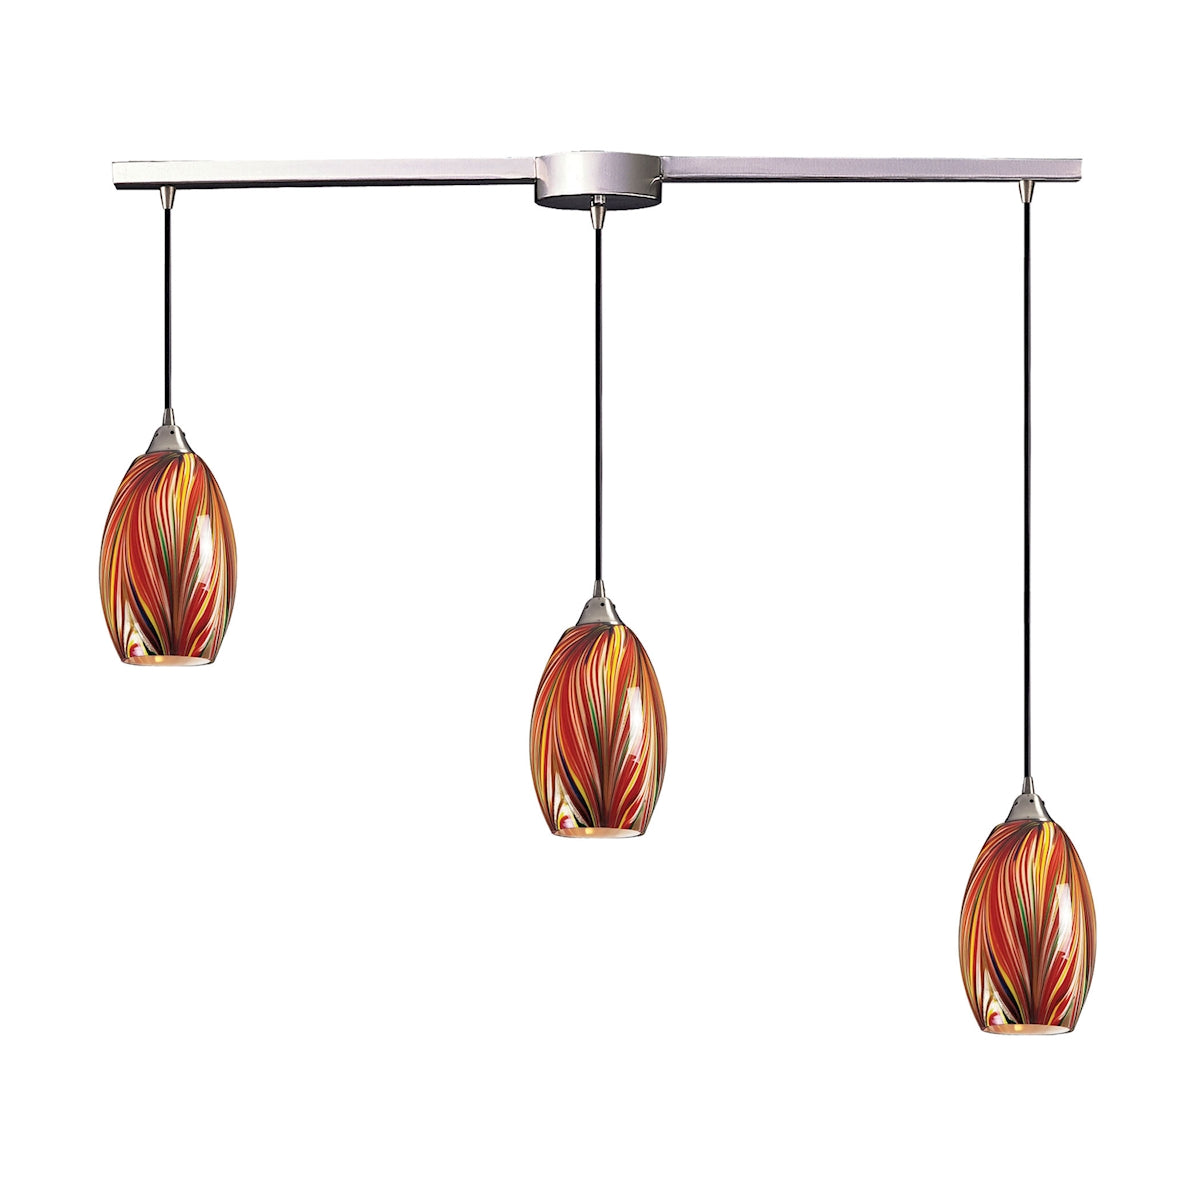 ELK Lighting 517-3L-M Mulinello 3-Light Linear Pendant Fixture in Satin Nickel with Multi-colored Glass